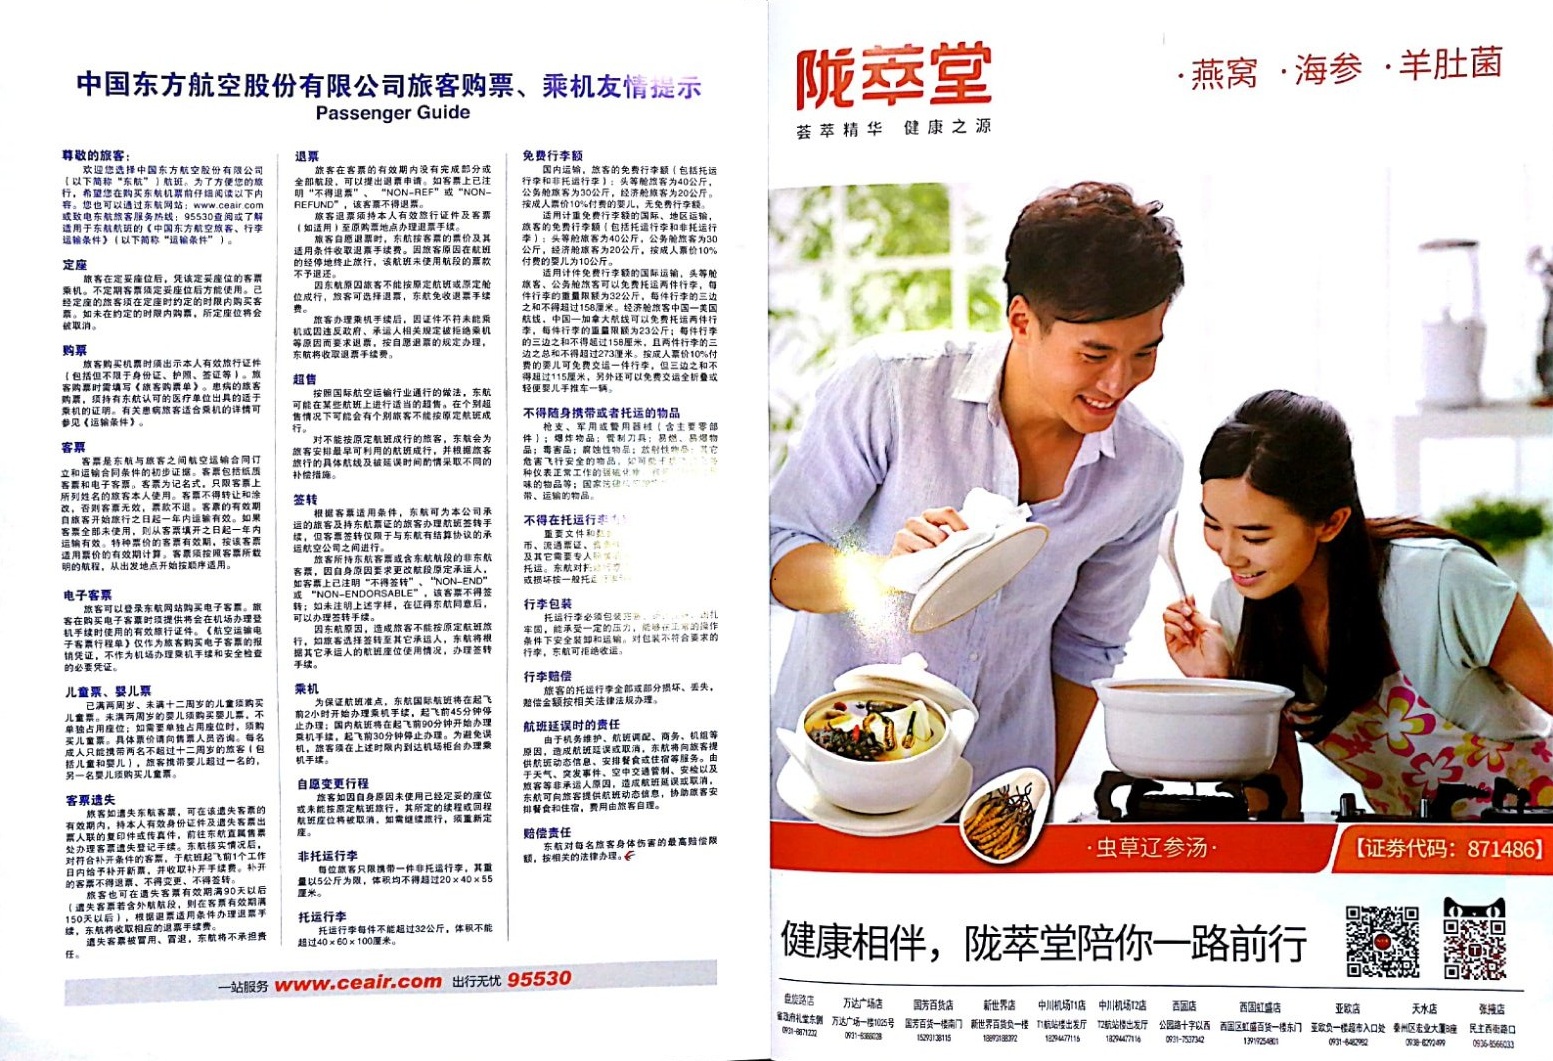 inflight magazine of China Eastern Eastern Channel